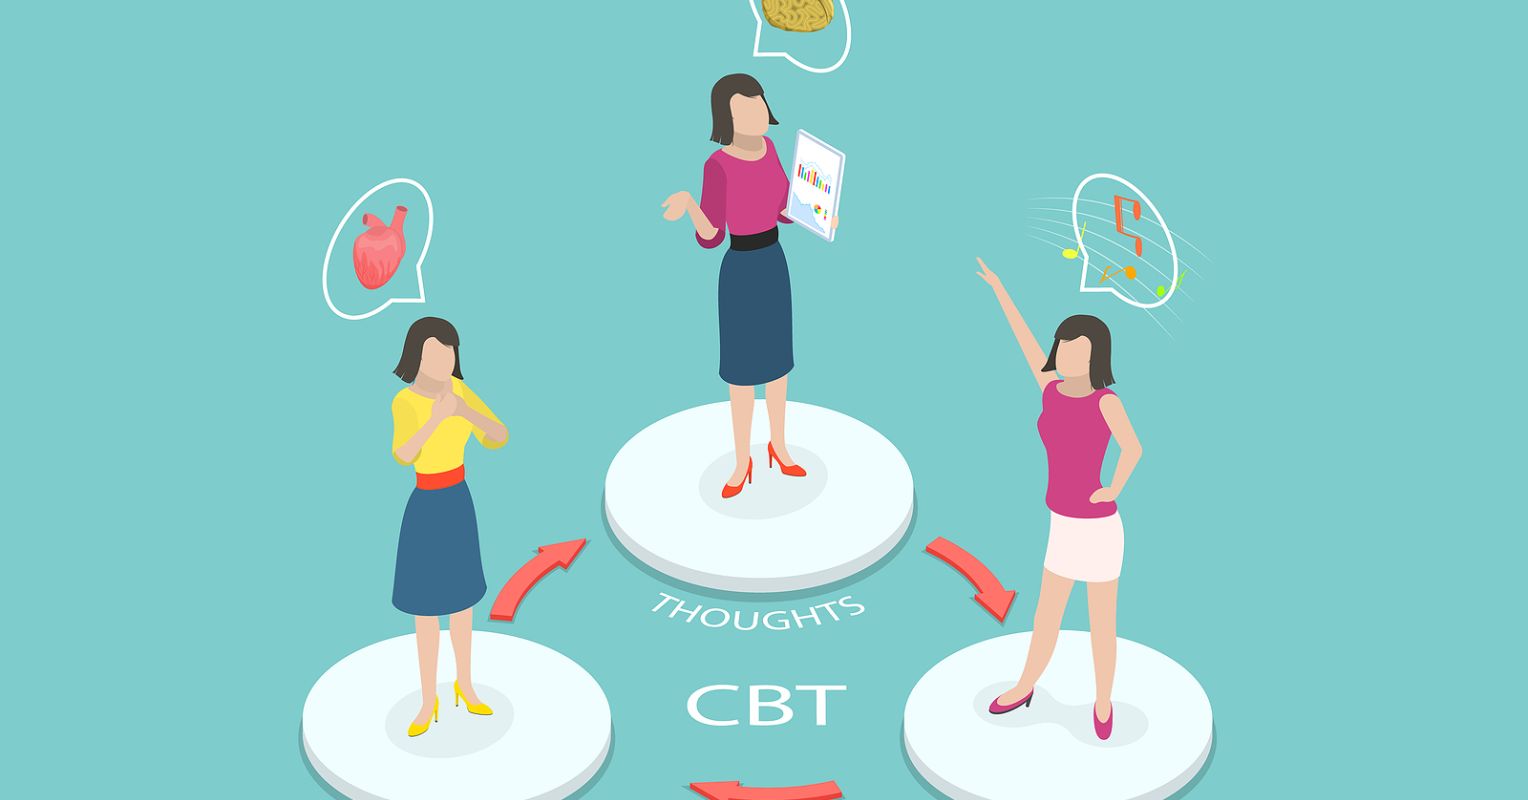 New Insights Into the Power of CBT Therapy